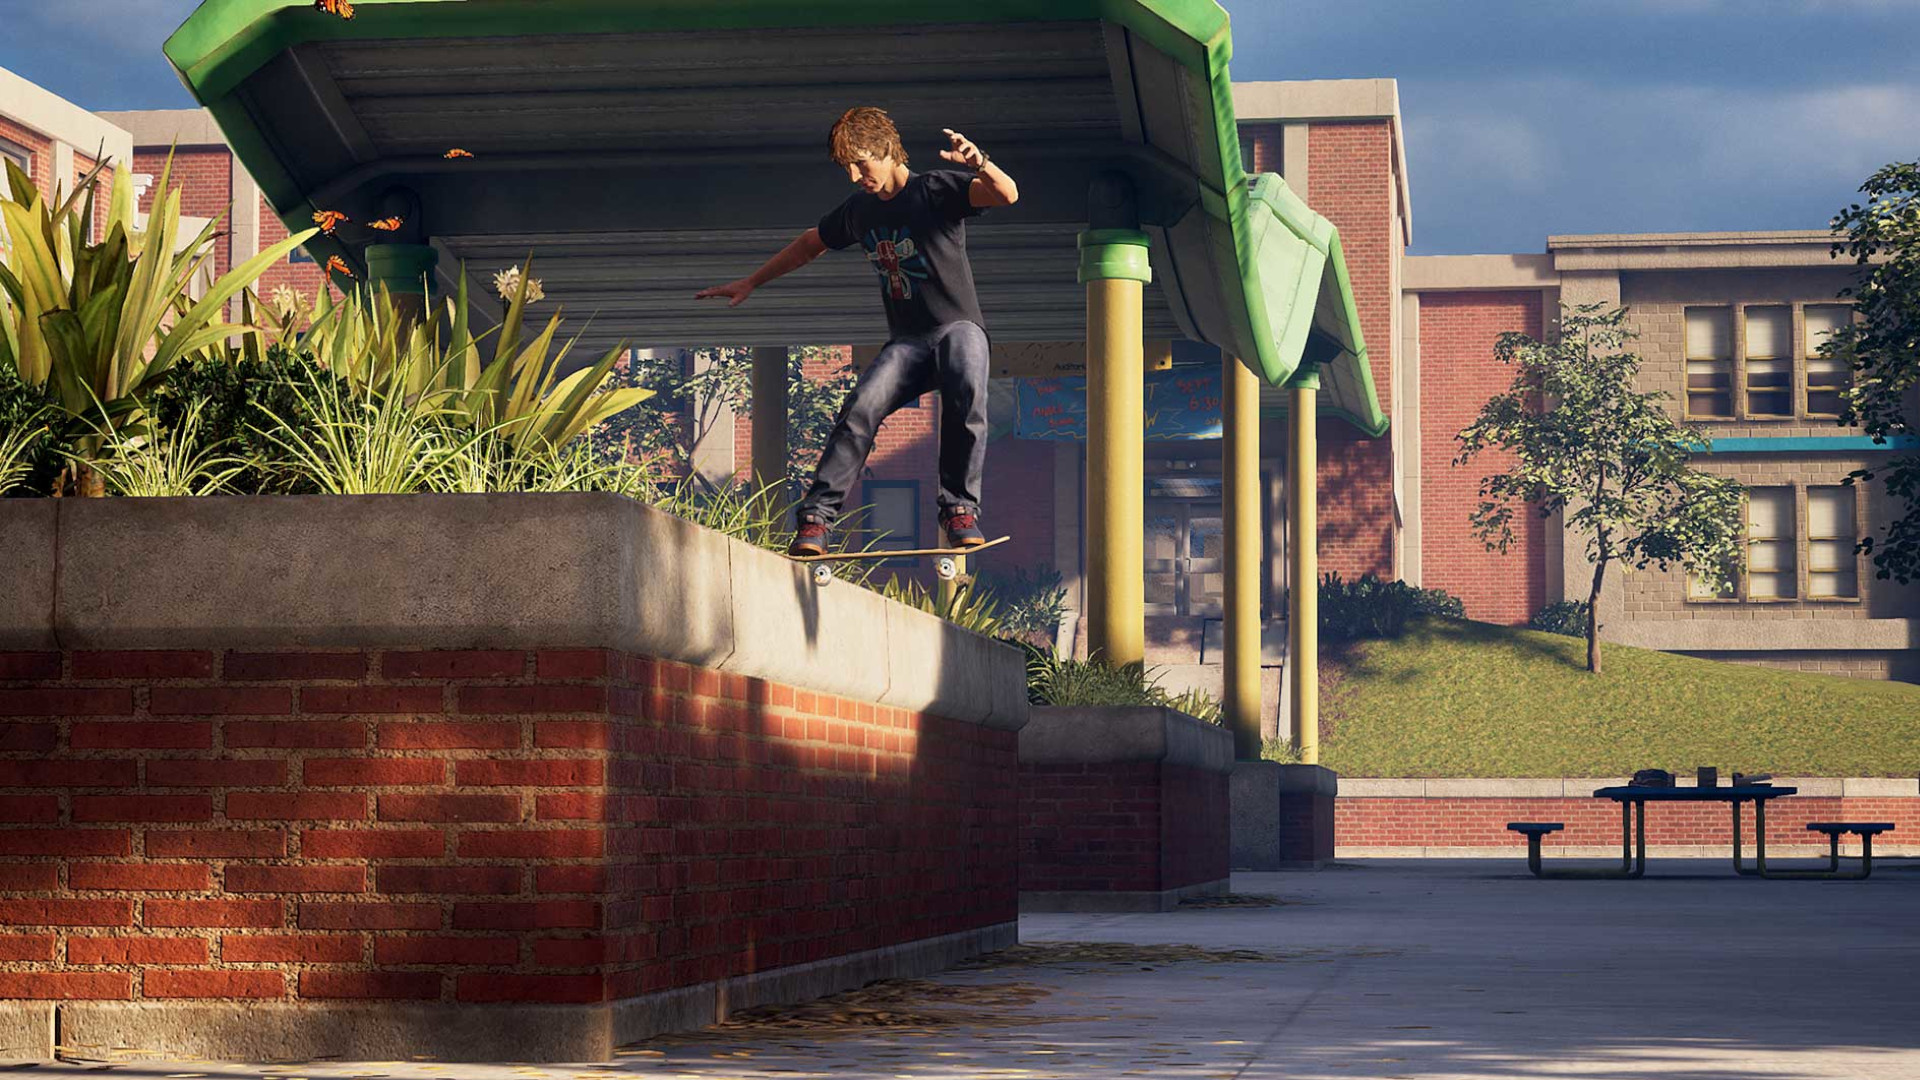 Tony Hawk's Pro Skater 1 + 2 is best on Steam Deck with new update